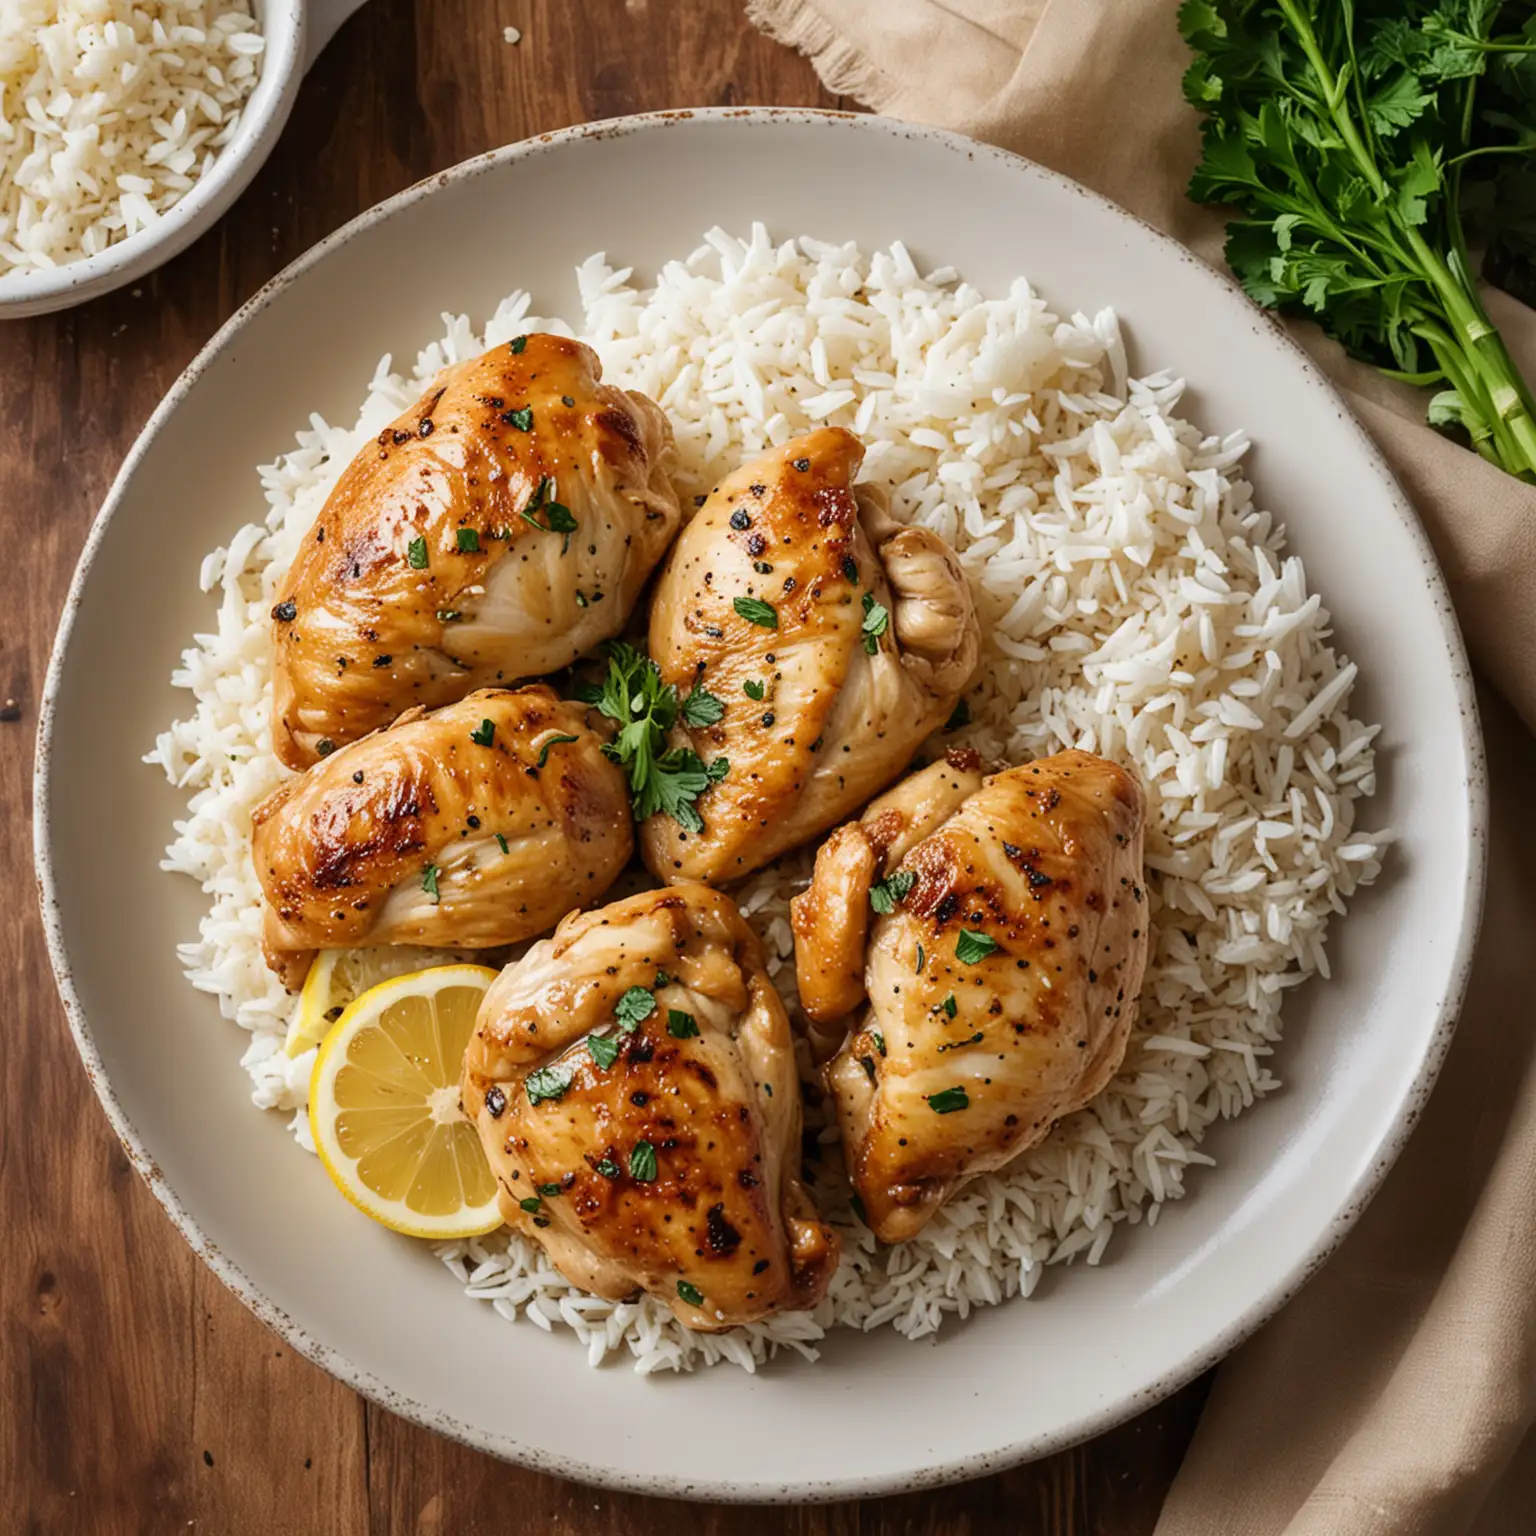 Lemon Garlic Chicken in a plate, with boiled rice